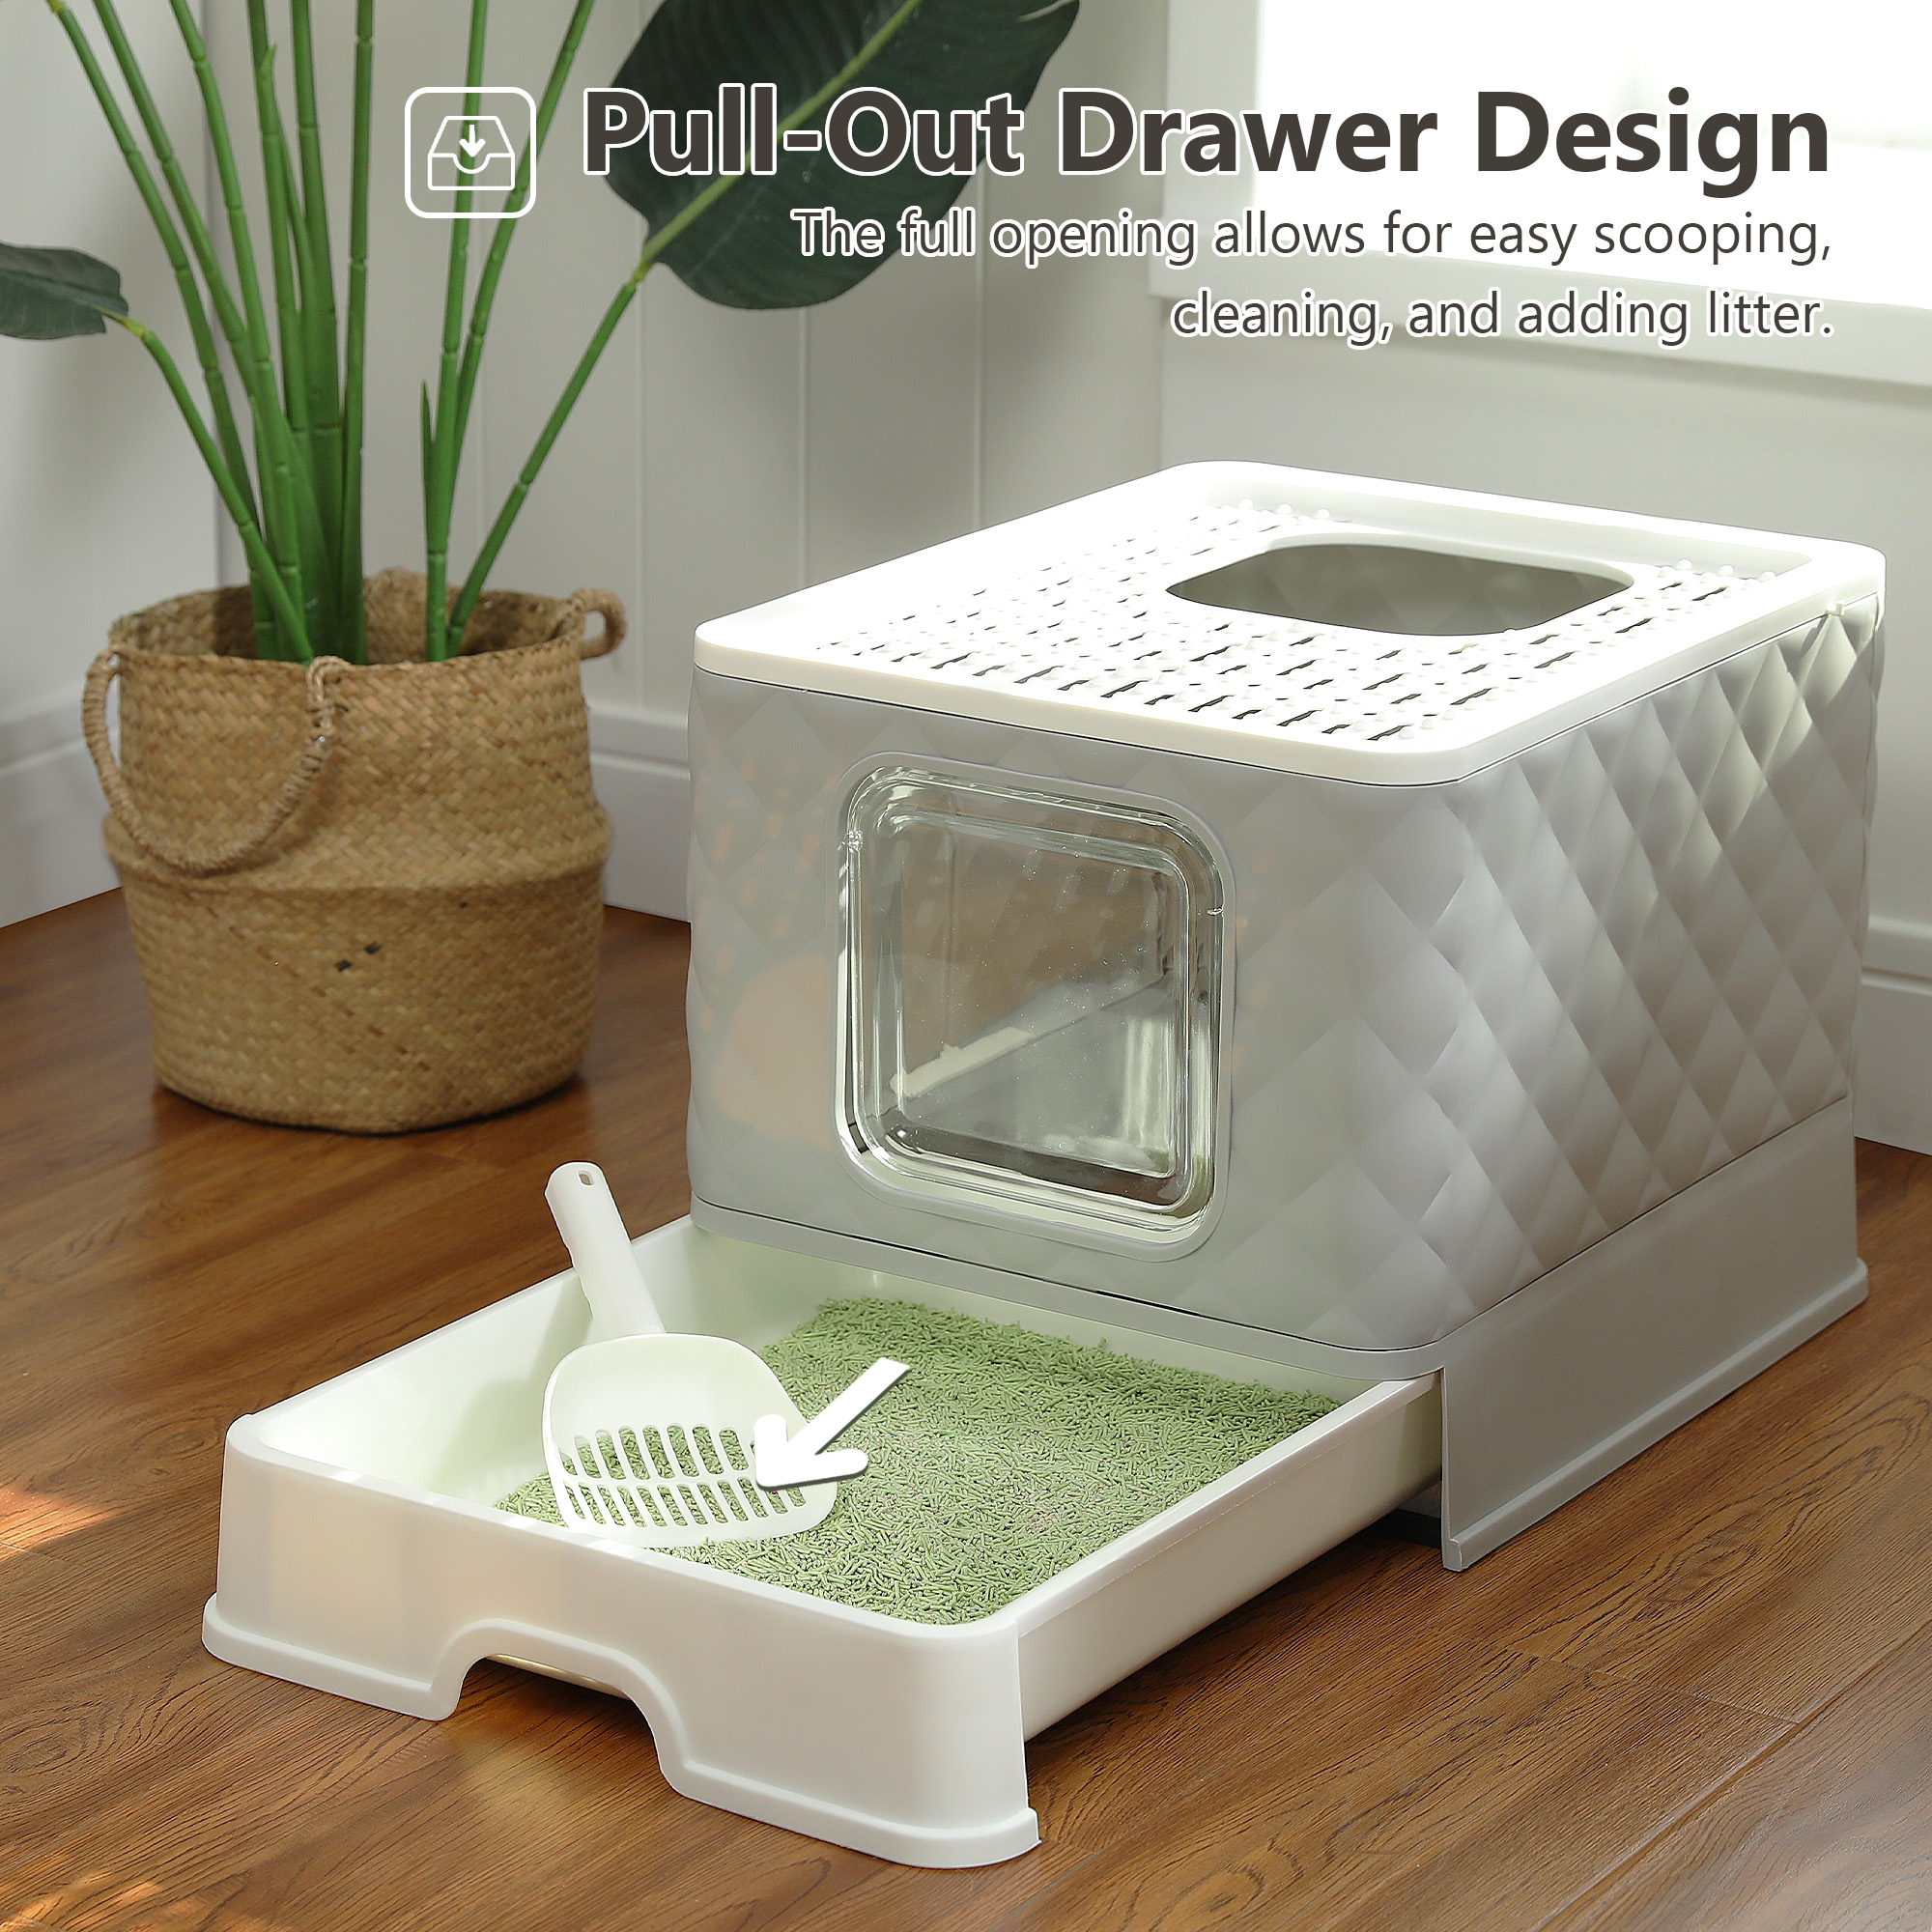 PAWZ Road Enclosed Cat Litter Box Large with Lid Drawer Type Easy to Clean,Gray - image 4 of 13